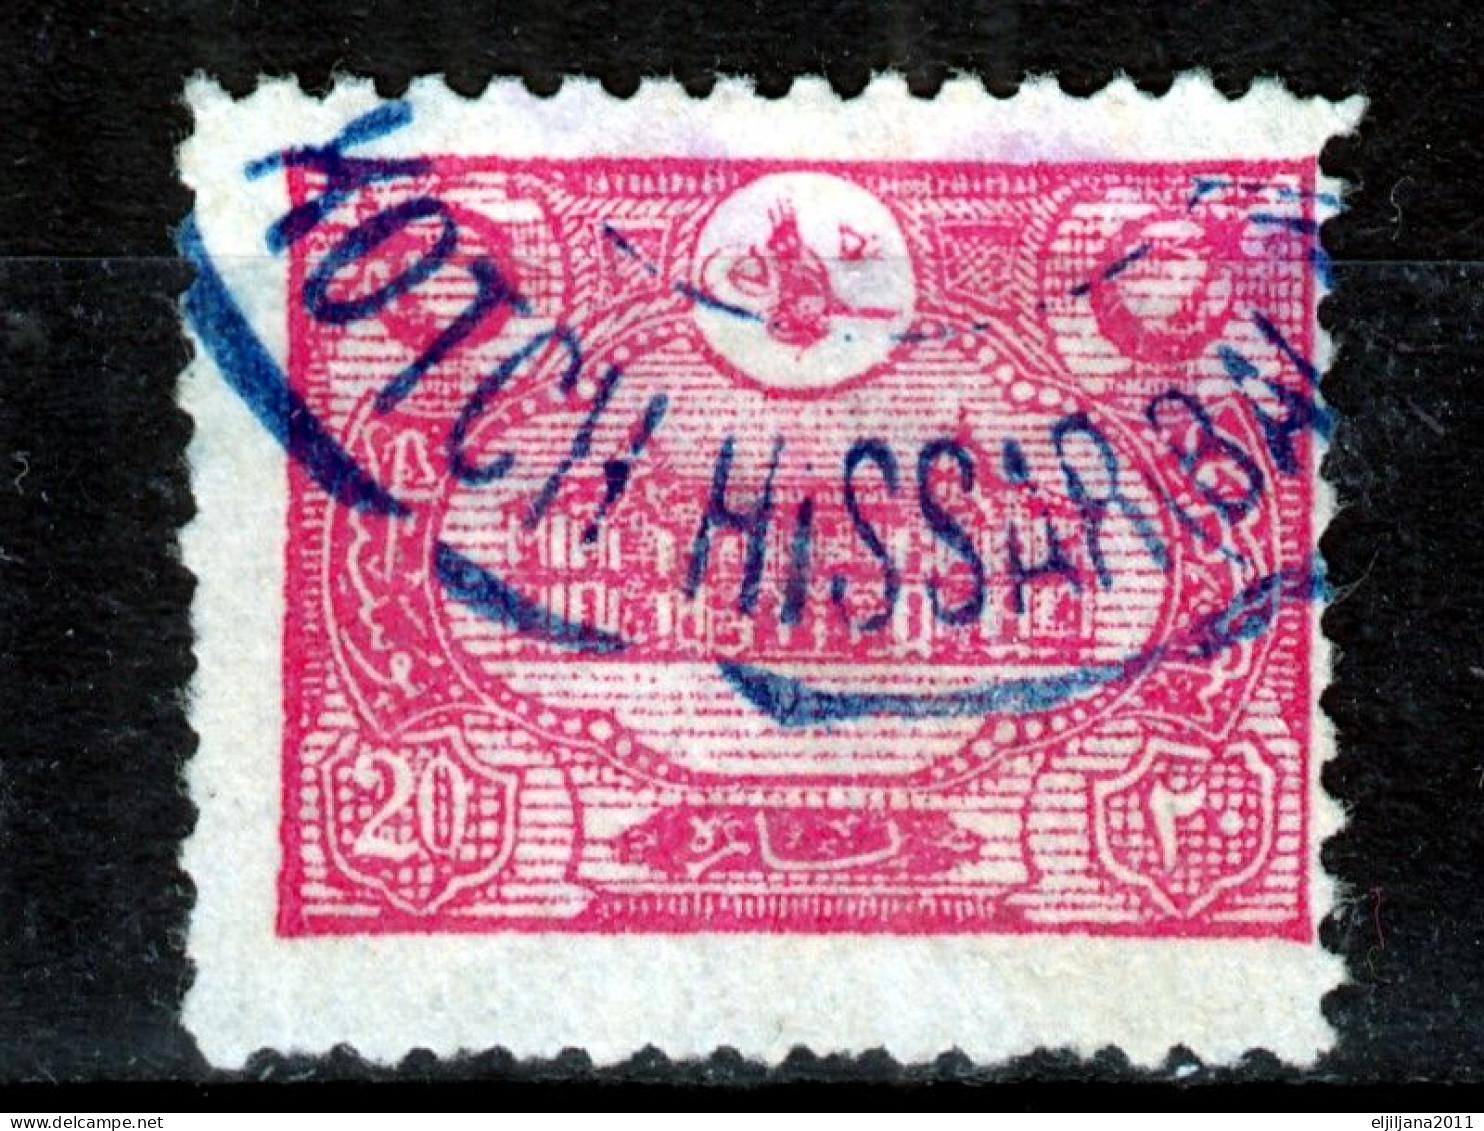 ⁕ Turkey 1913 ⁕ Ottoman Empire /  Main post office Constantinople ⁕ 19v used- nice postmark - see scan